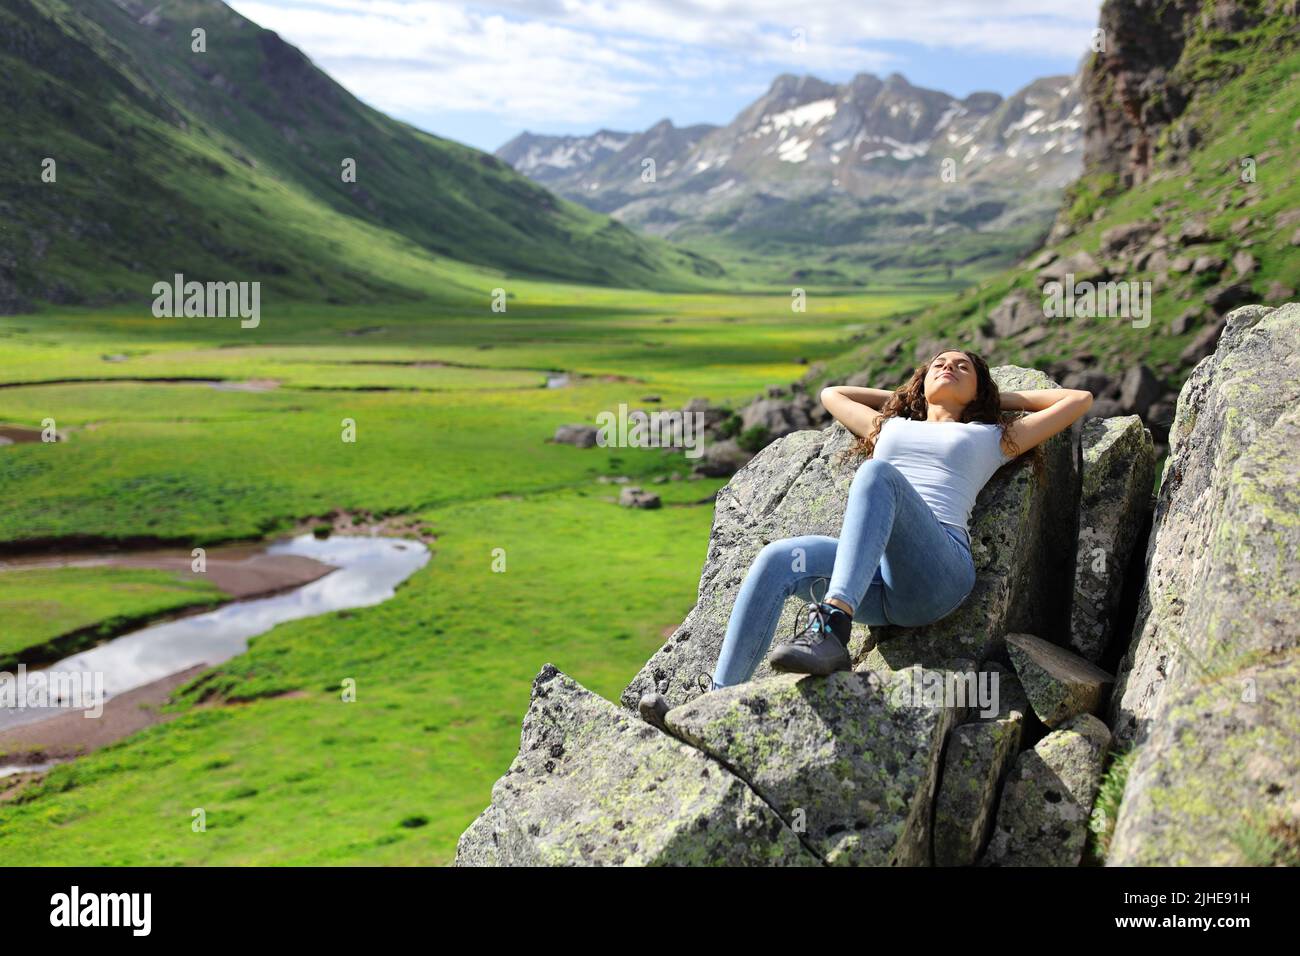 Full body portrait of a woman resting in a beautiful mountain landscape Stock Photo